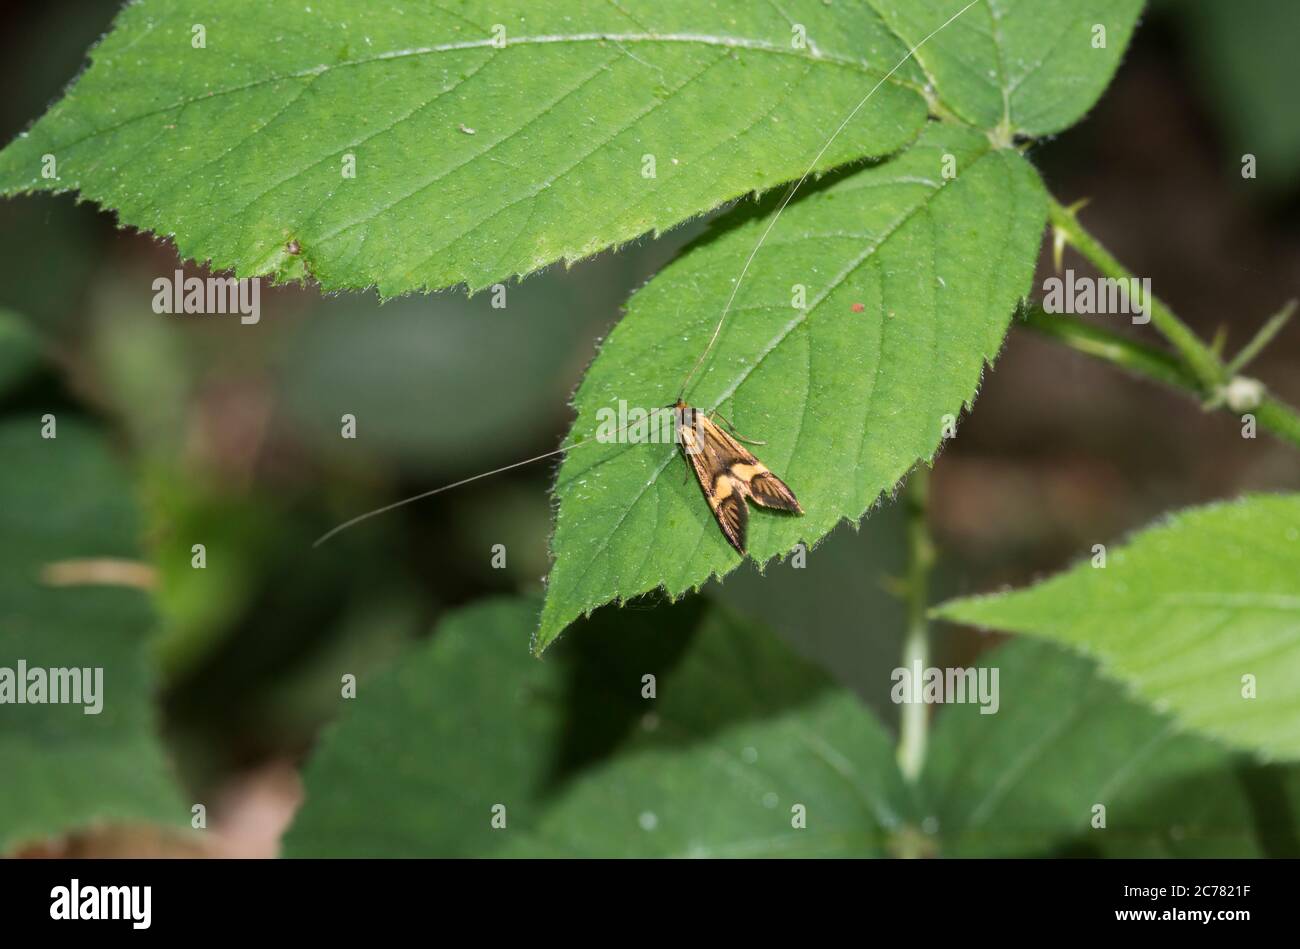 Long-horned moth (Nemophora degeerella) perched on a leaf Stock Photo